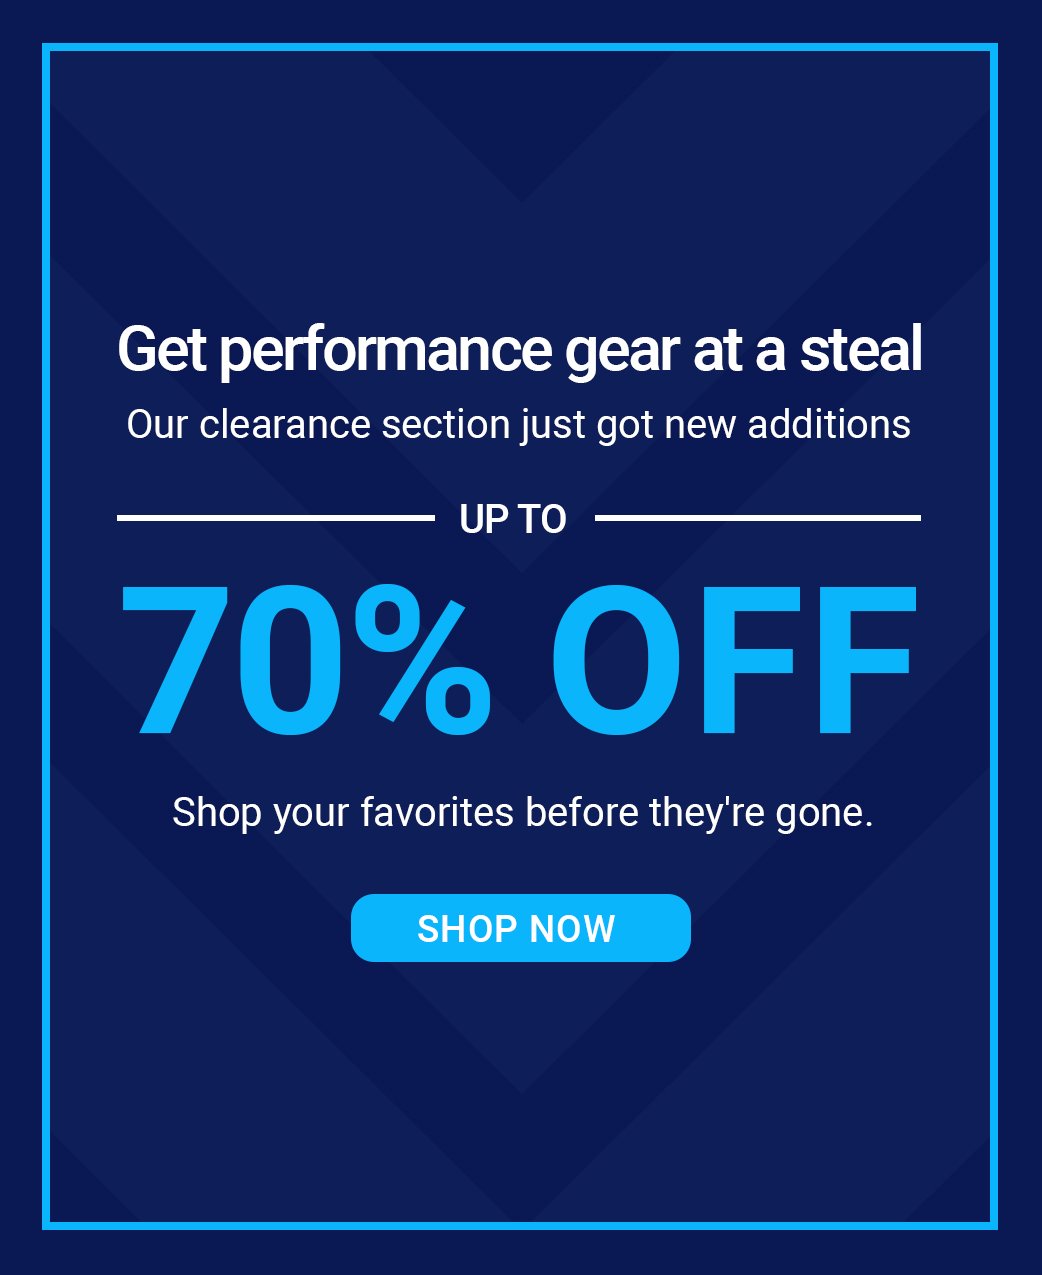 Get performance gear at a steal. Our clearance section just got new additions up to 70% off. Shop your favorites before they're gone. [SHOP NOW]